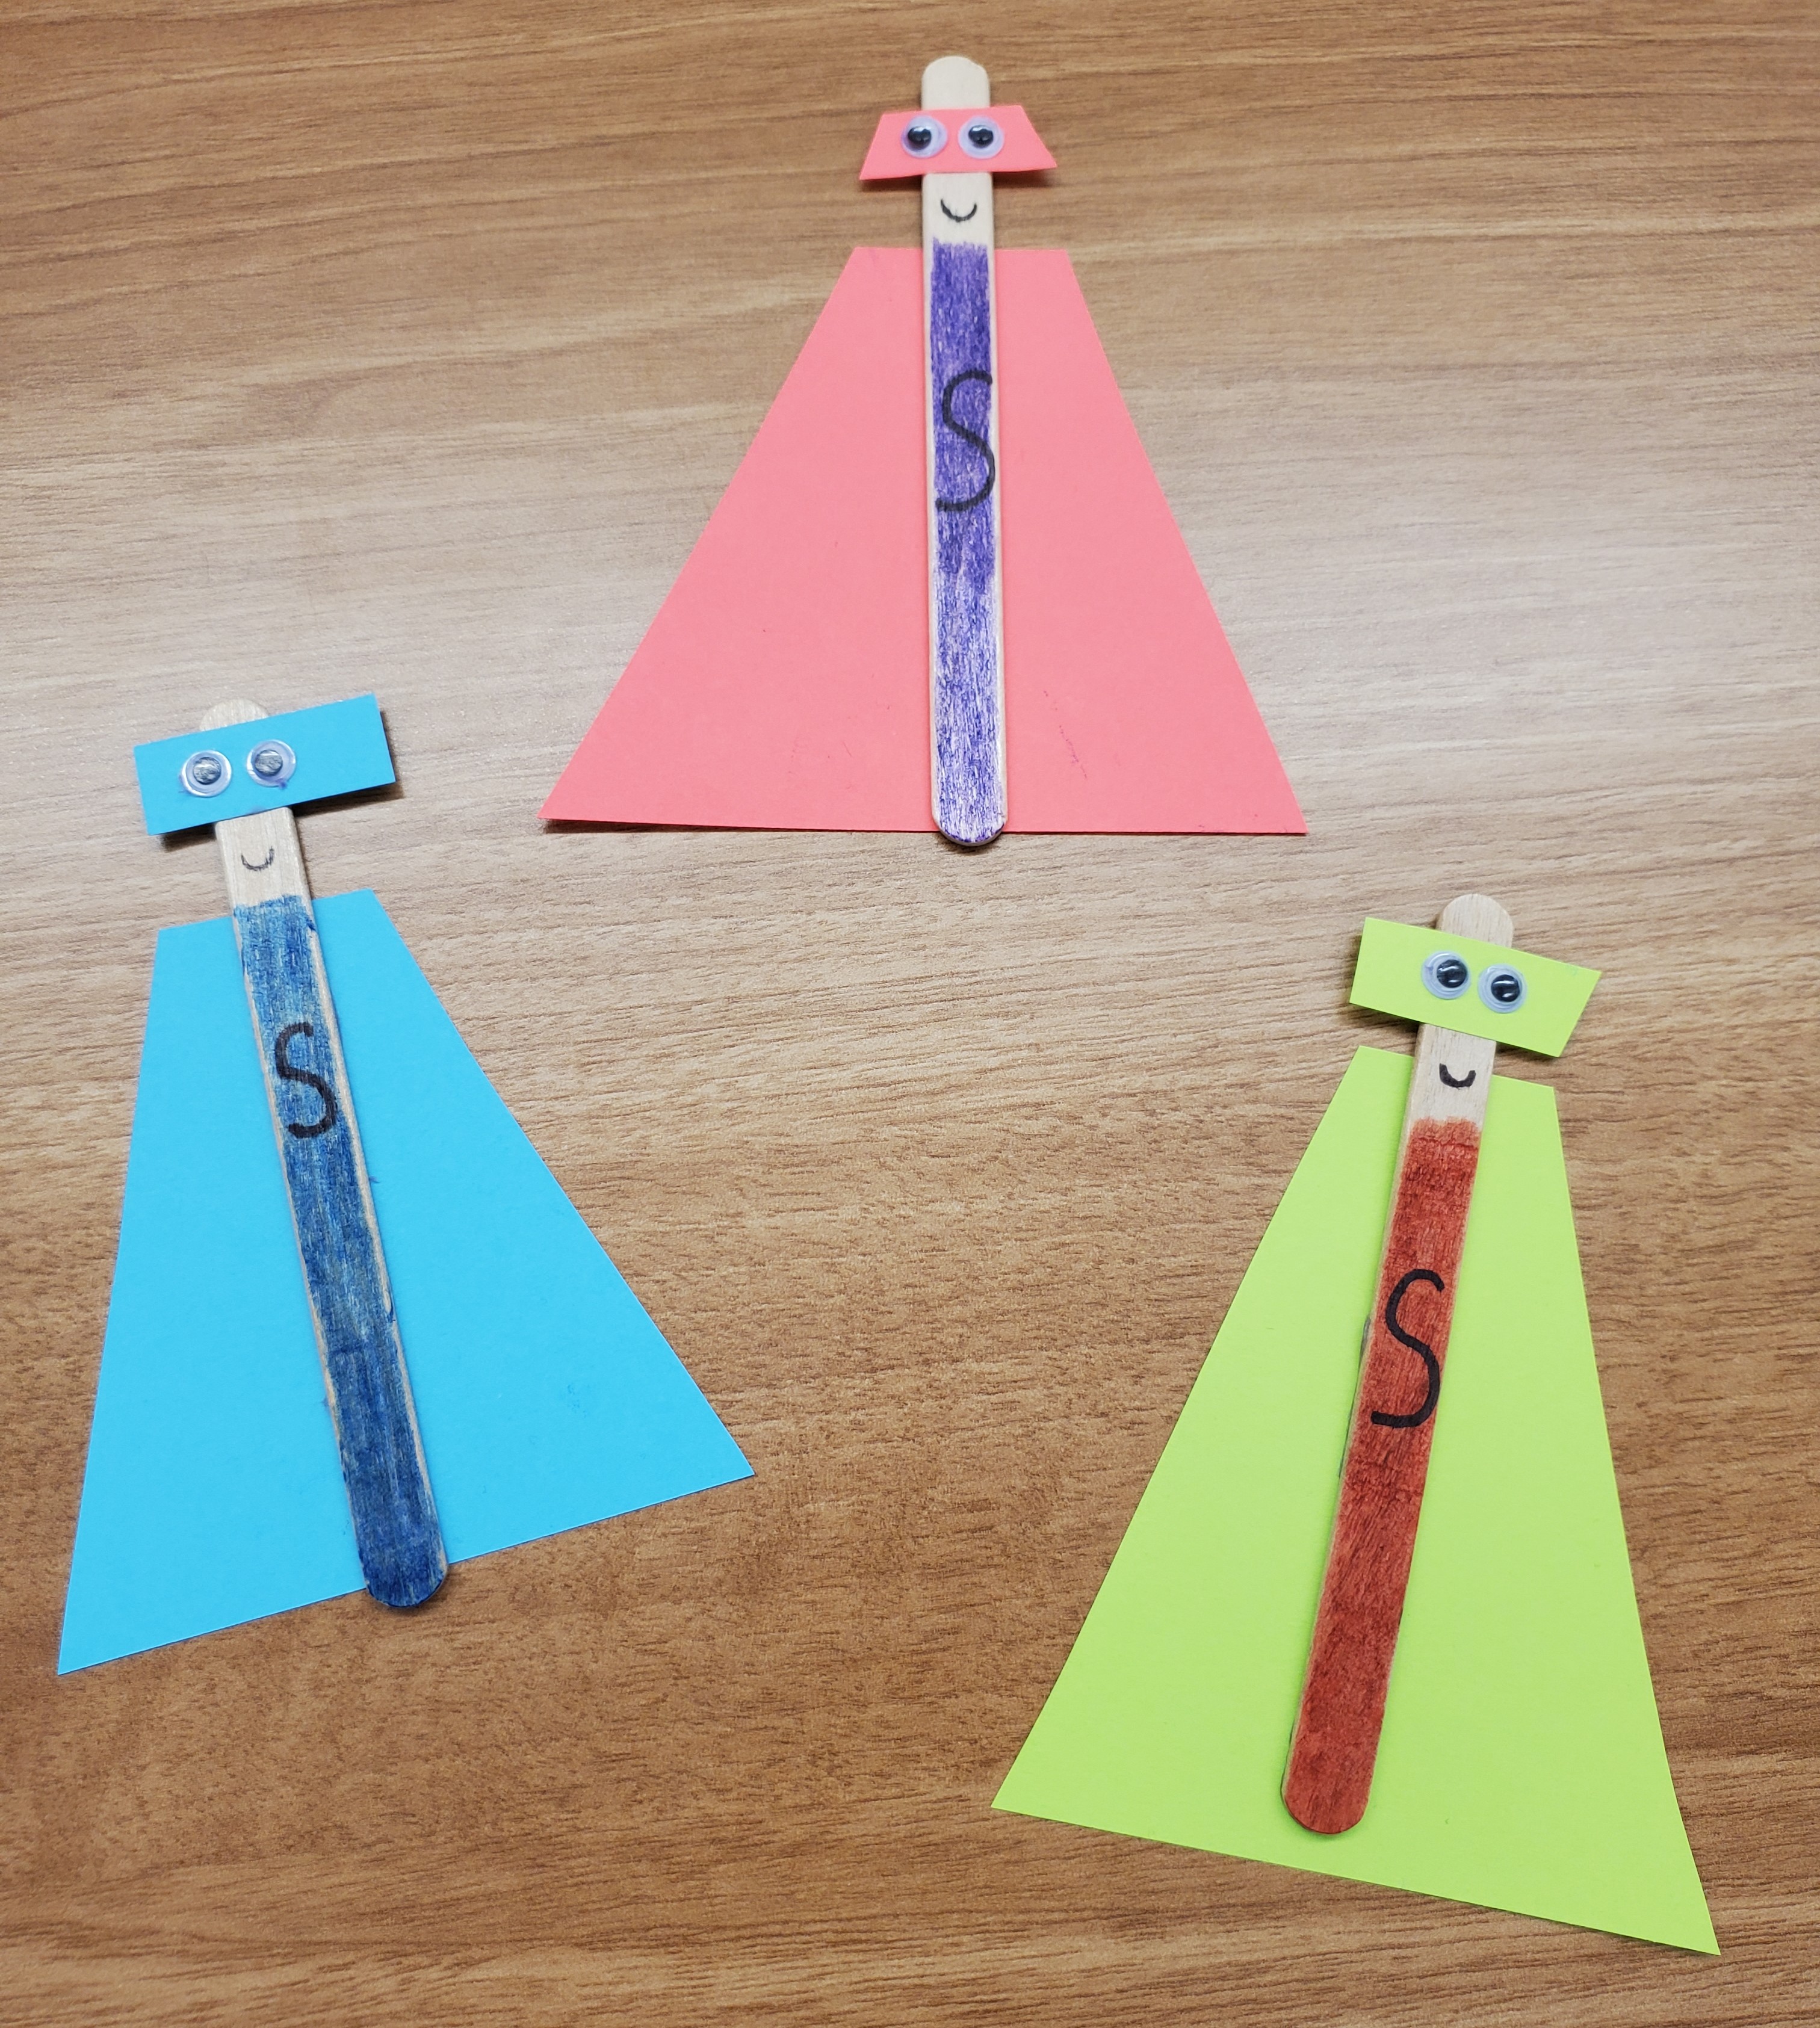 Example of three superhero popsicle stick crafts. Each craft has a different color cape and mask made from paper - one is blue, one is red, and one is yellow.